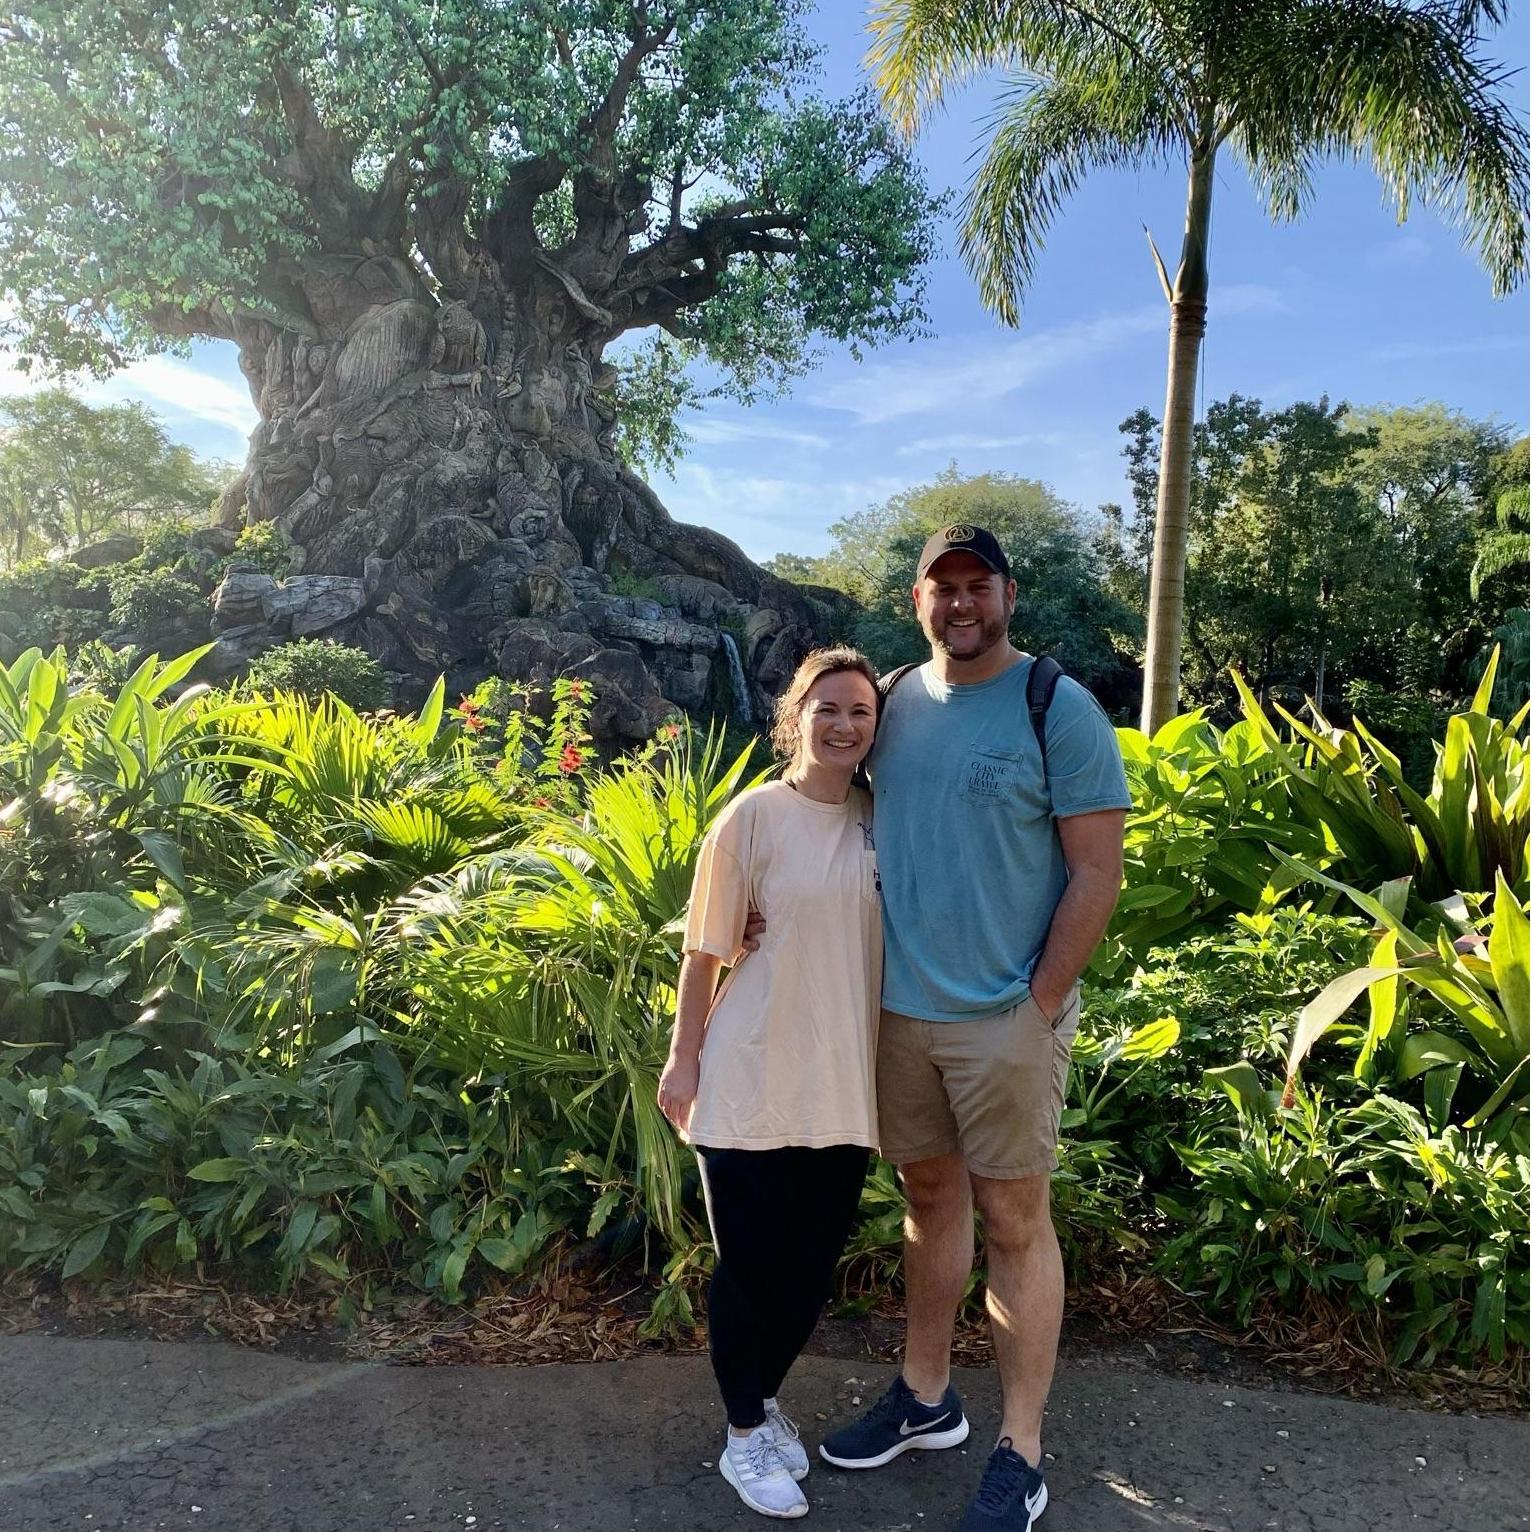 Colt surprised me with a trip to Orlando for my 25th birthday. It was our first trip just the two of us & we had the best time at Animal Kingdom, Sea World, Universal Studios & Islands of Adventure.